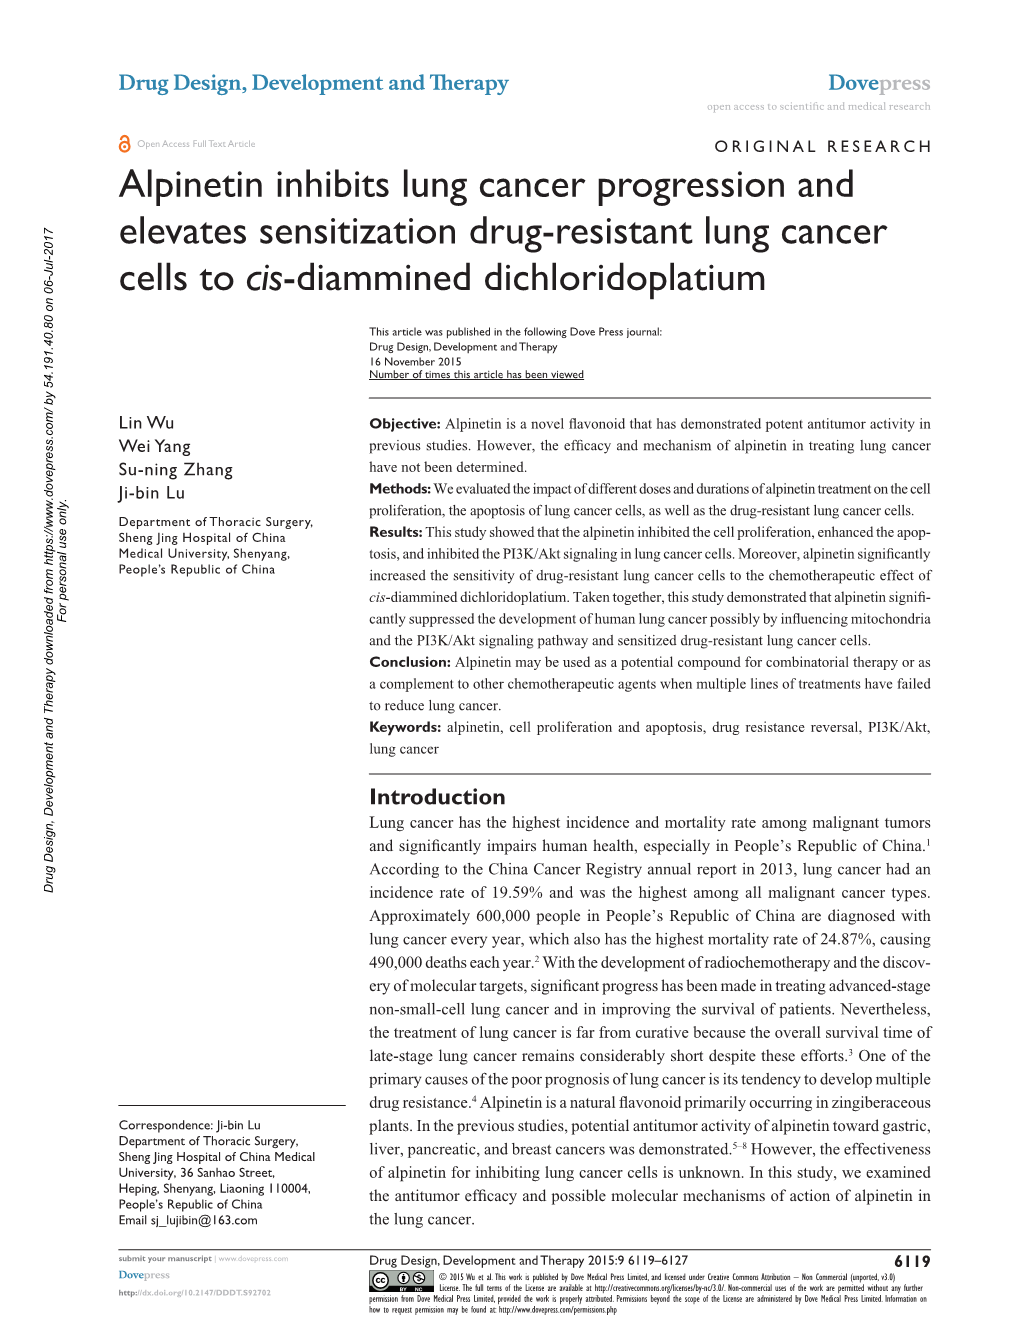 Alpinetin Inhibits Lung Cancer Progression and Elevates Sensitization Drug-Resistant Lung Cancer Cells to Cis-Diammined Dichloridoplatium